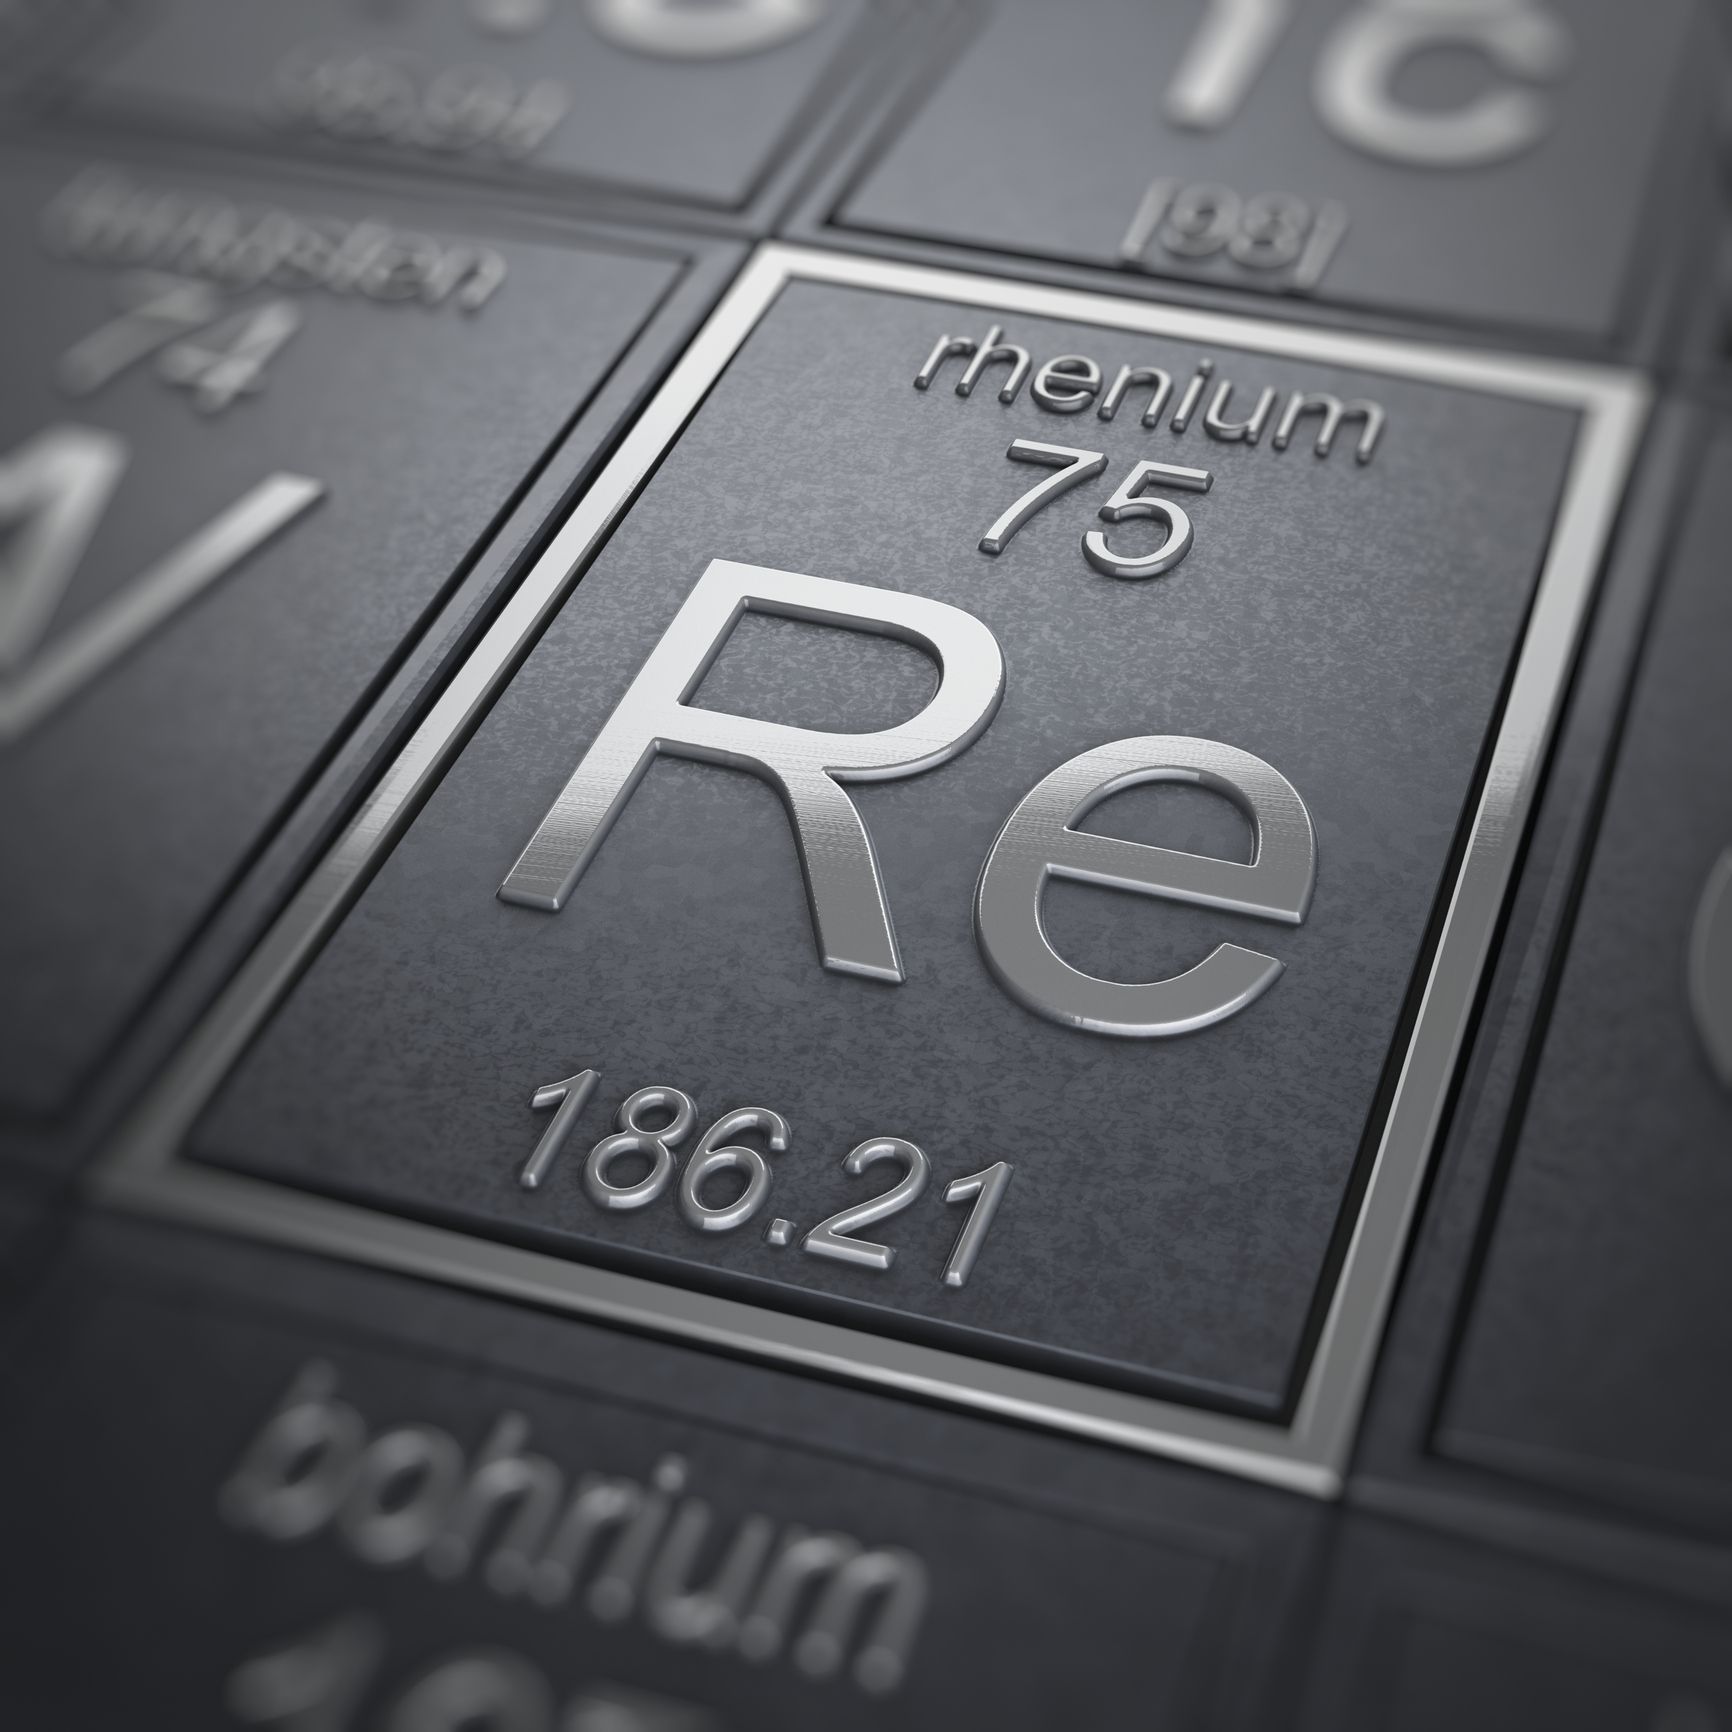 Rhenium Facts - Periodic Table of the Elements